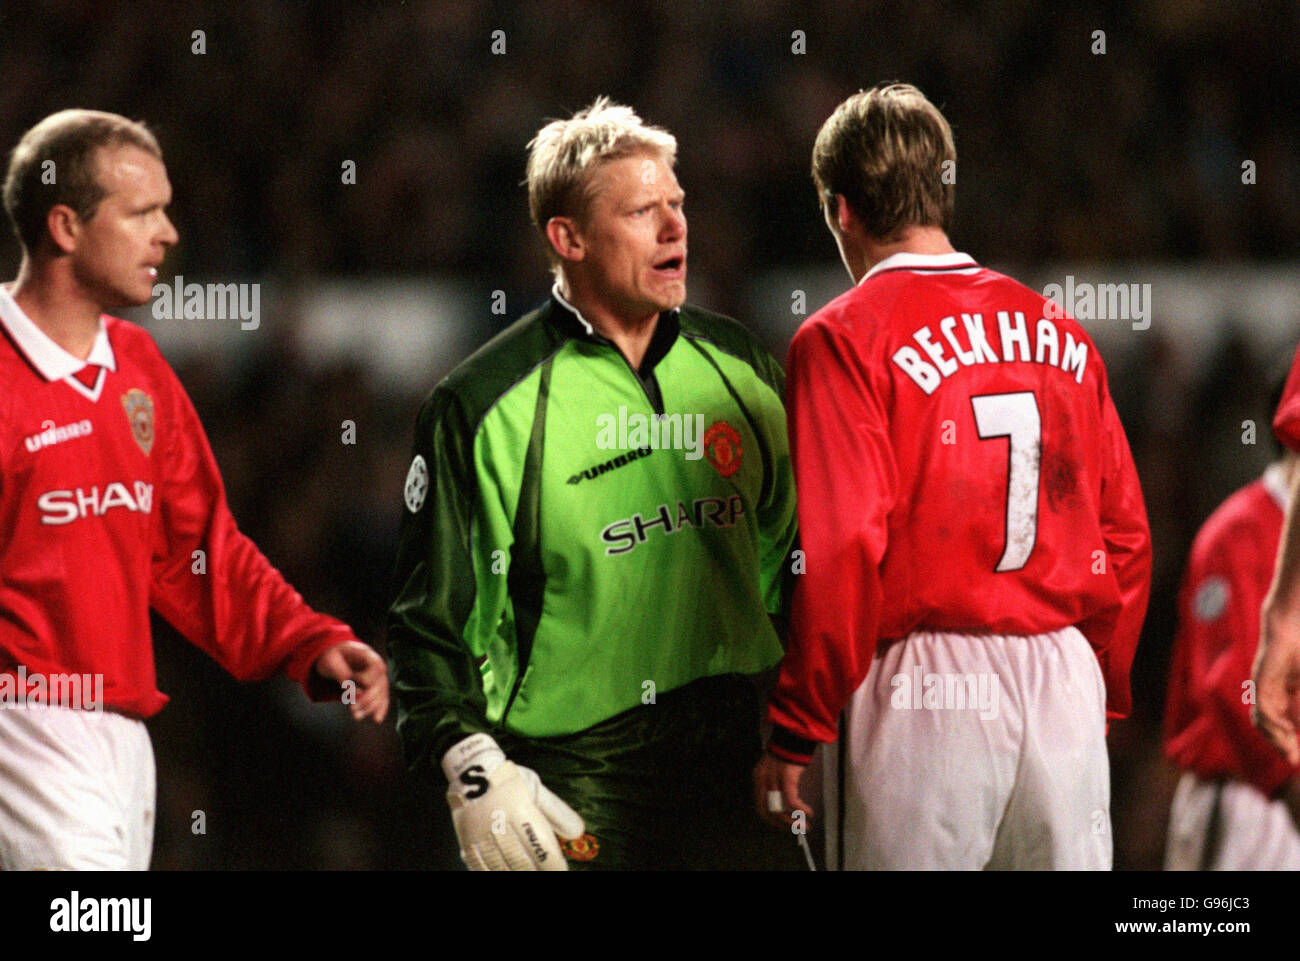 Manchester United goalkeeper Peter Schmeichel (centre) appears to be shouting at David Beckham (right) as teammate Henning Berg (left) looks on Stock Photo